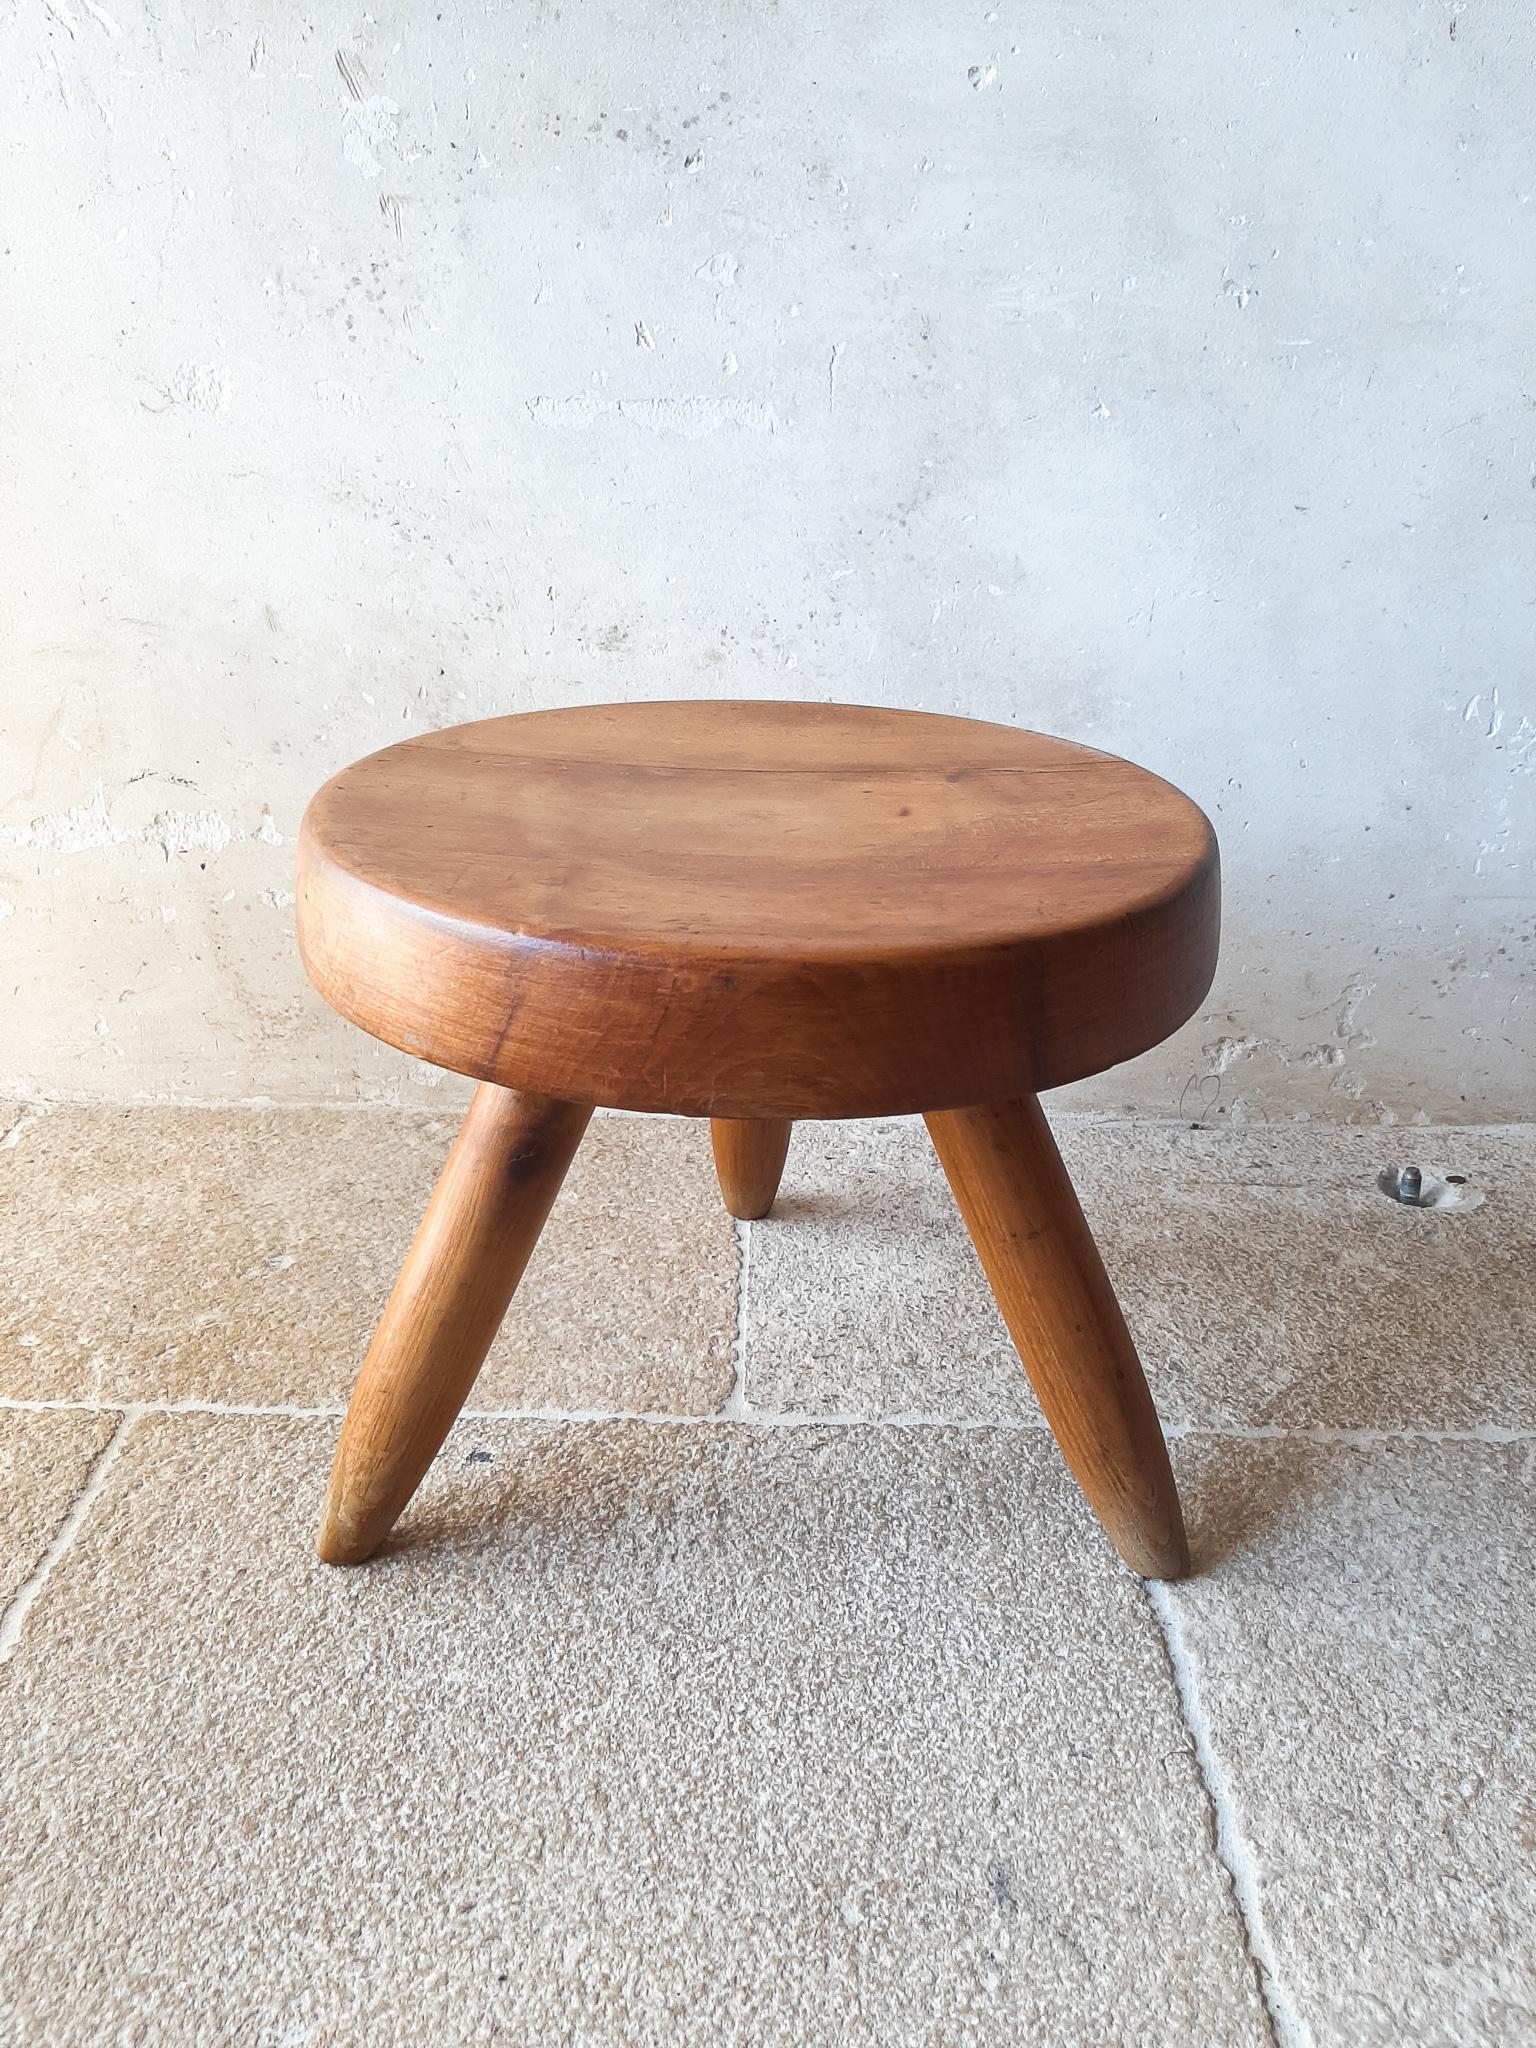 Original Charlotte Perriand, Berger stool for Steph Simon Galleries, circa 1950s. This solid oak wood tabouret tripod, has visible honest aging and patina as you can see on the close-up photo's made in the sun. The typical connection, used for